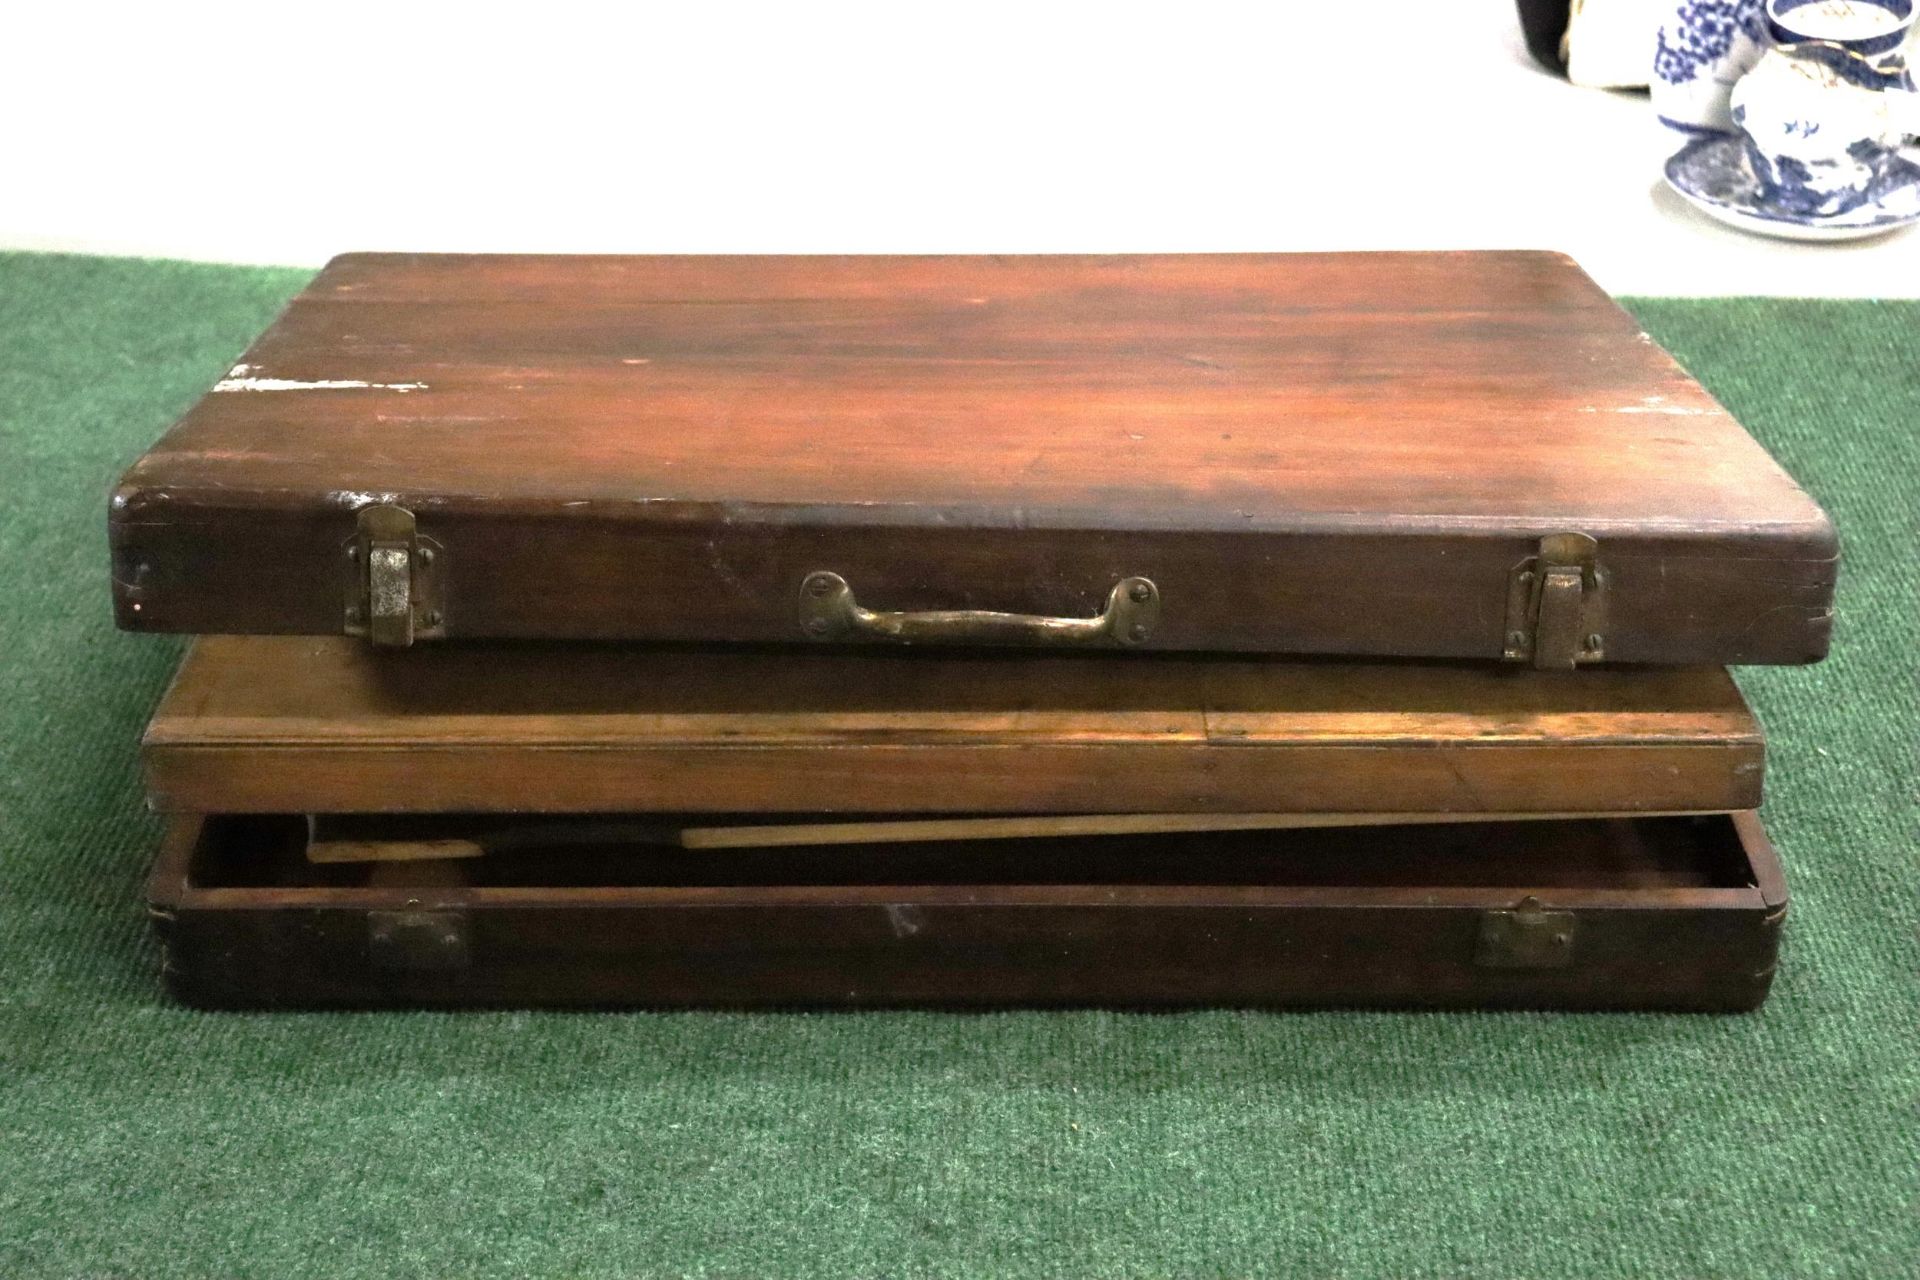 A VINTAGE ARTISTS PALETTE AND PAINT TRAY IN A WOODEN CASE